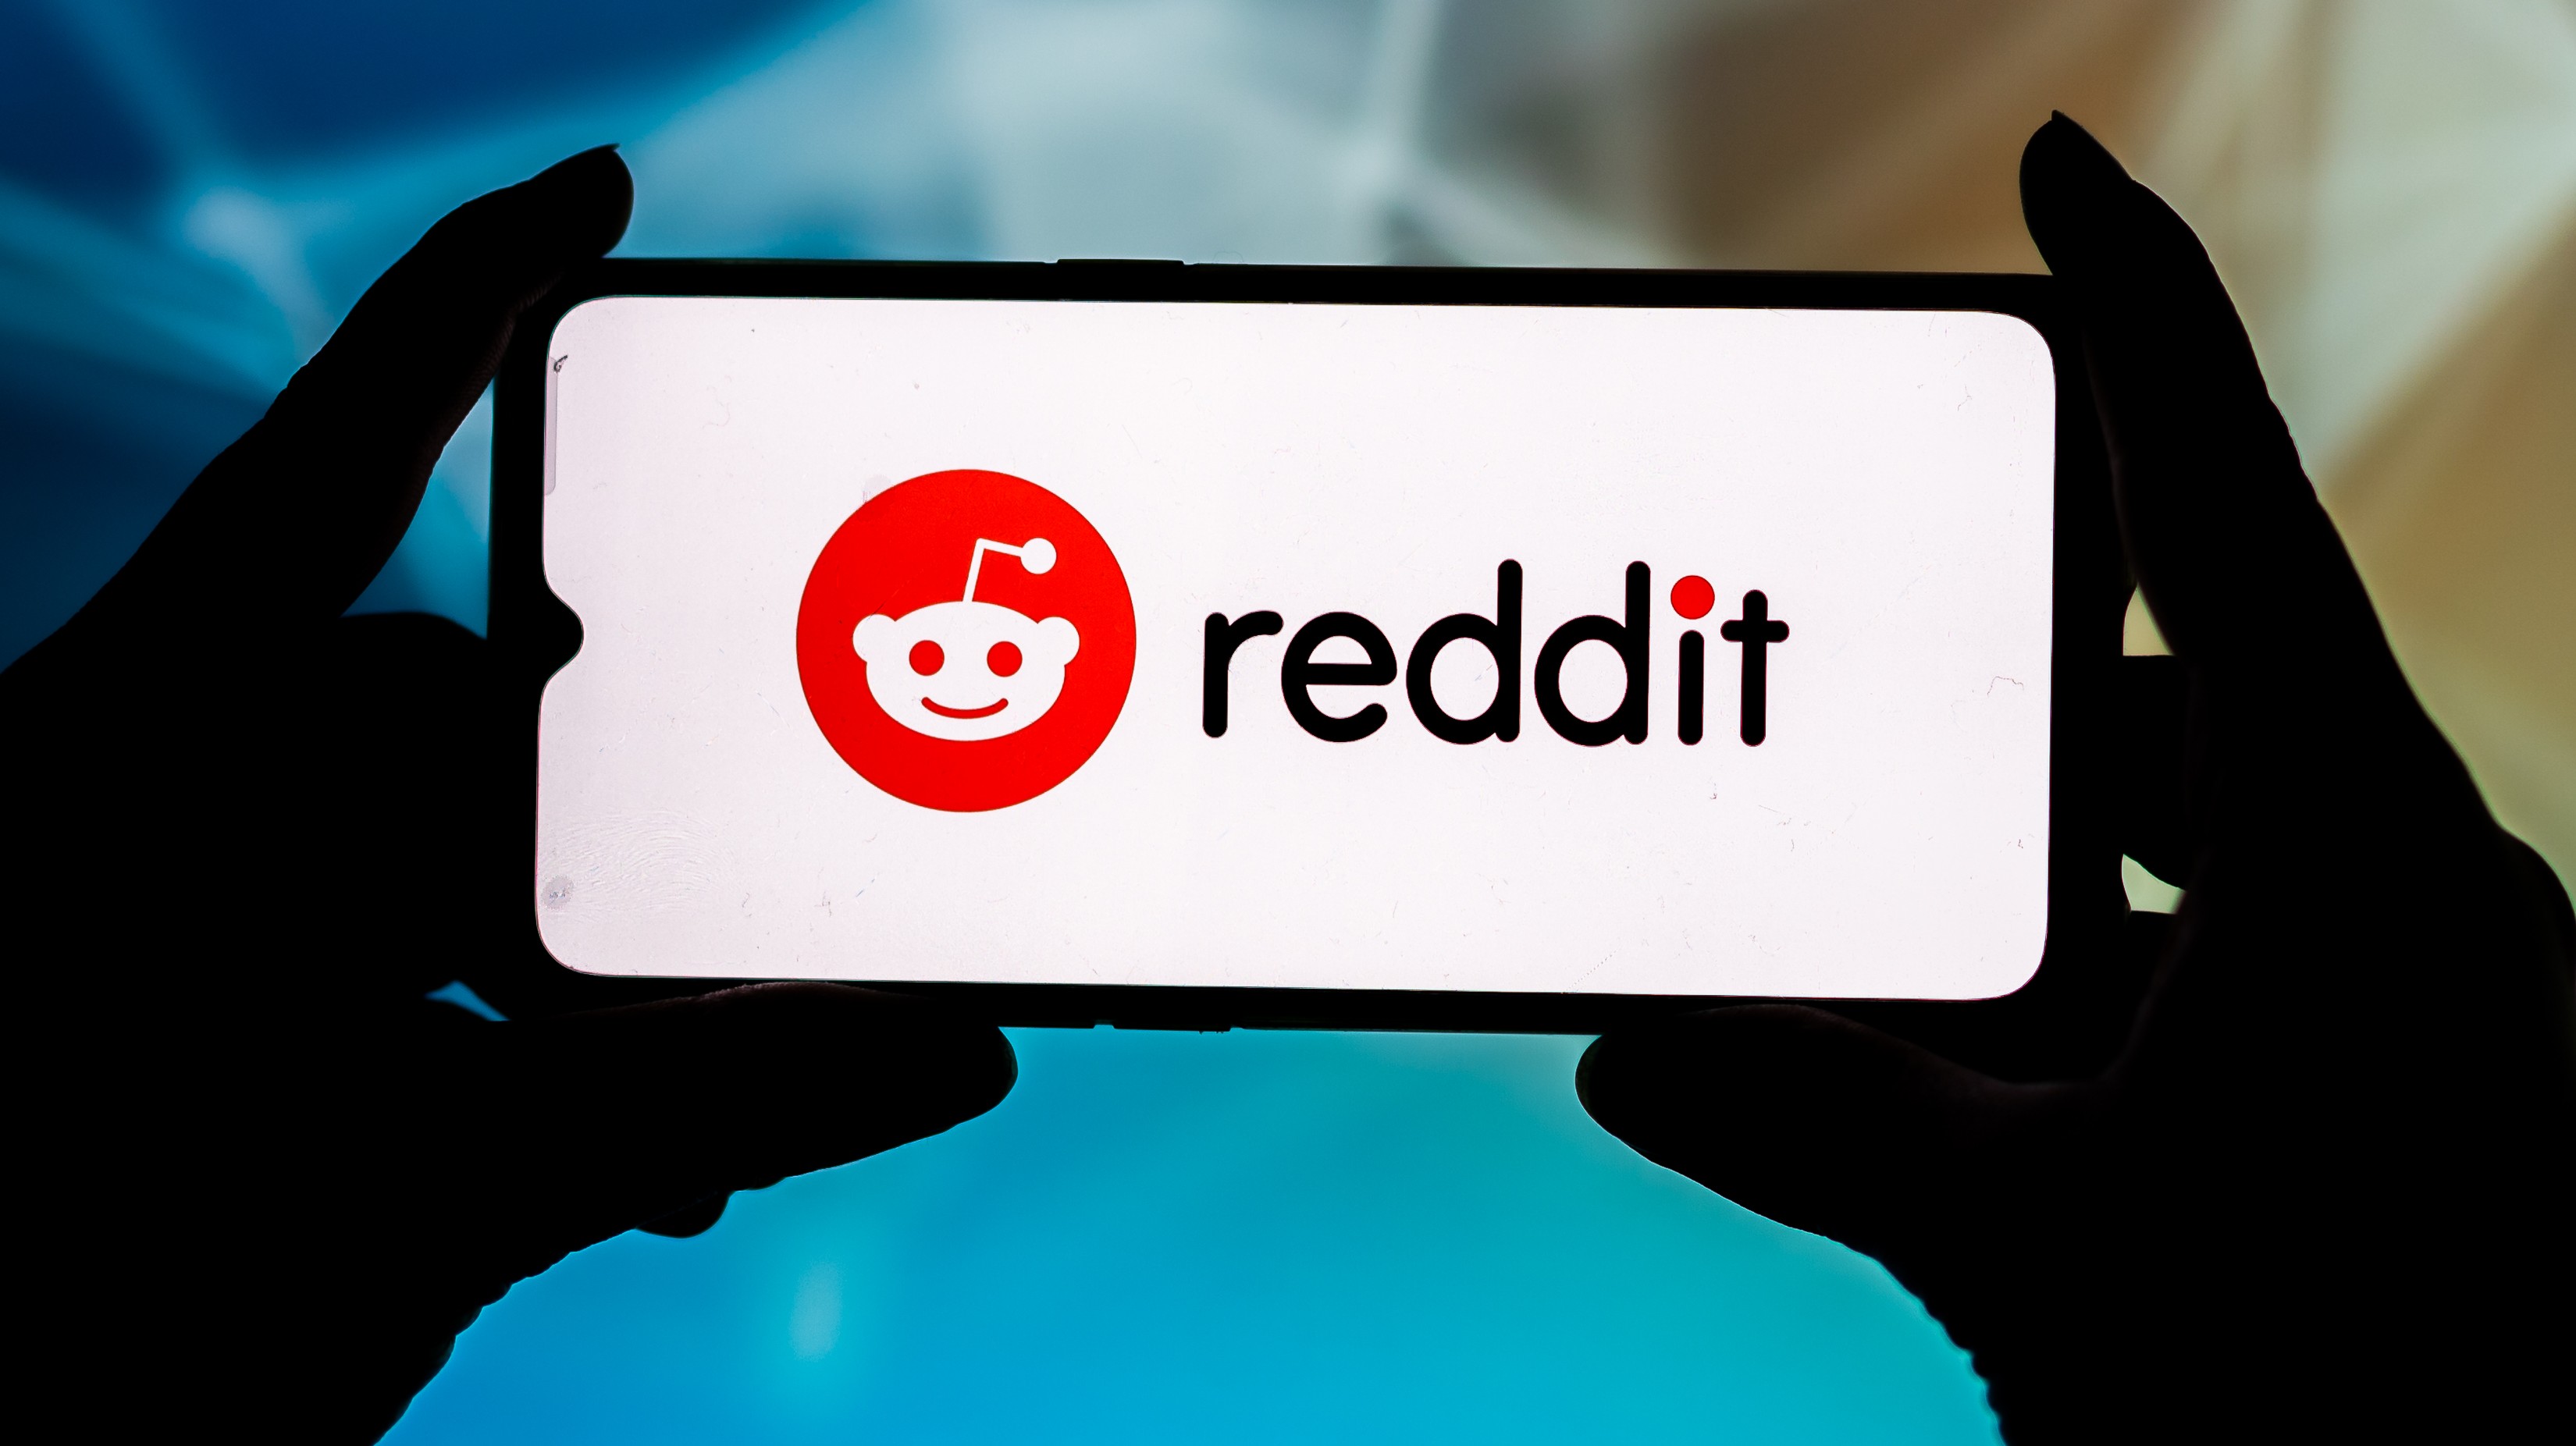 Best Porn On Reddit You Can't Look at Porn on Any Reddit Third-Party App Now